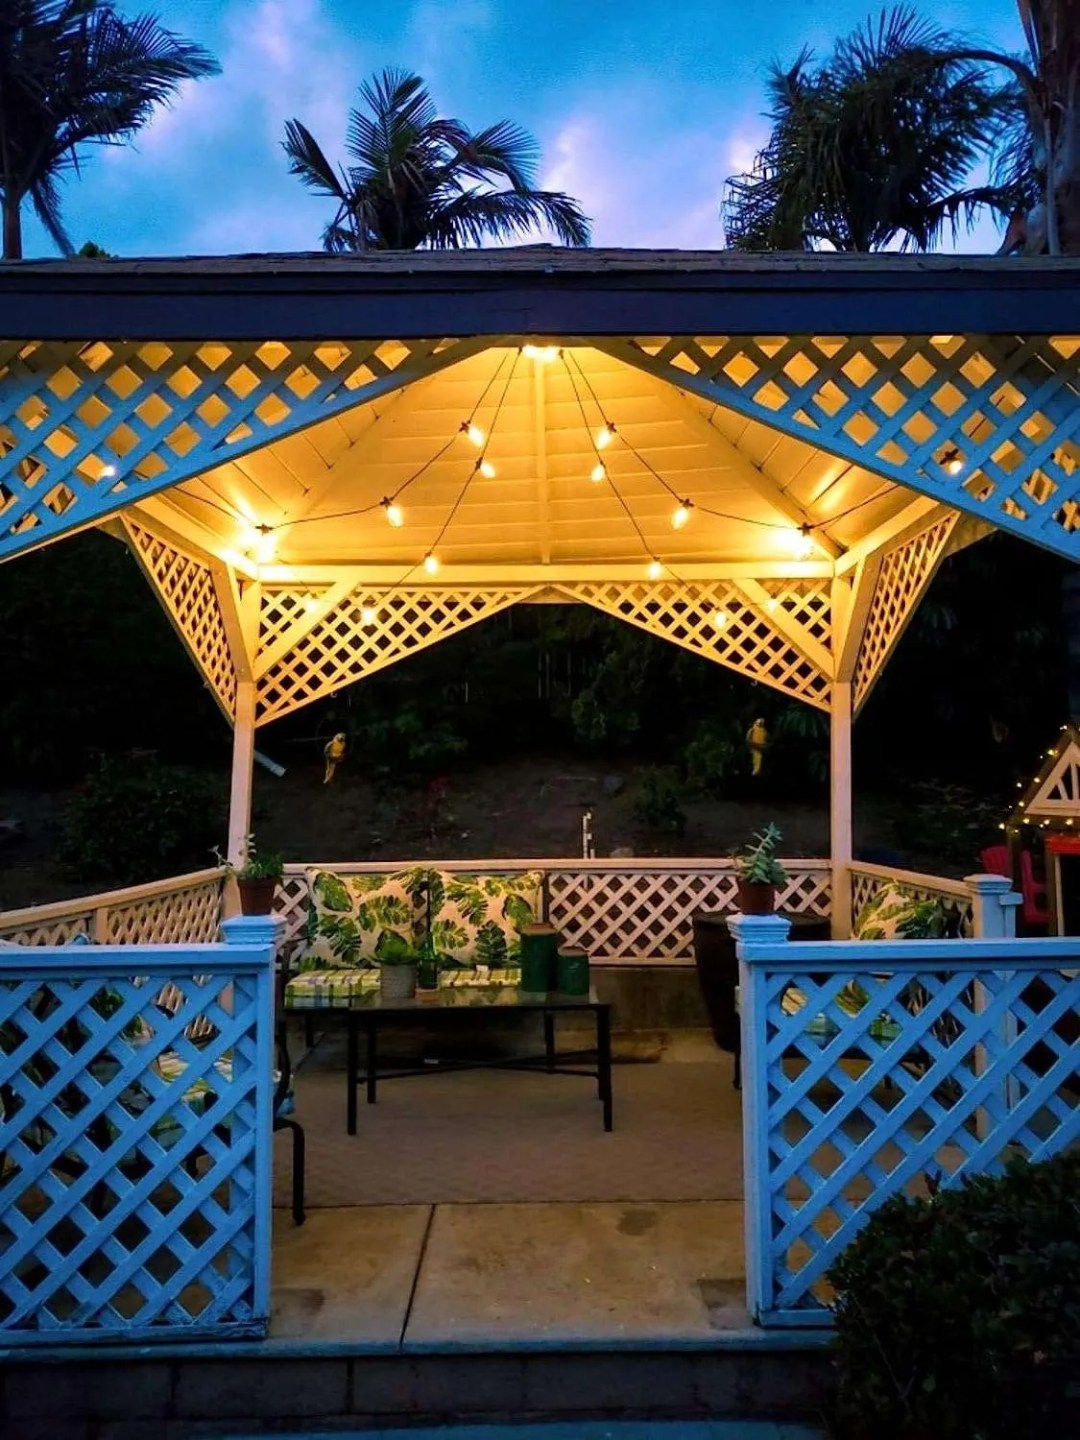 a gazebo with solar powered lights hanging on the roof